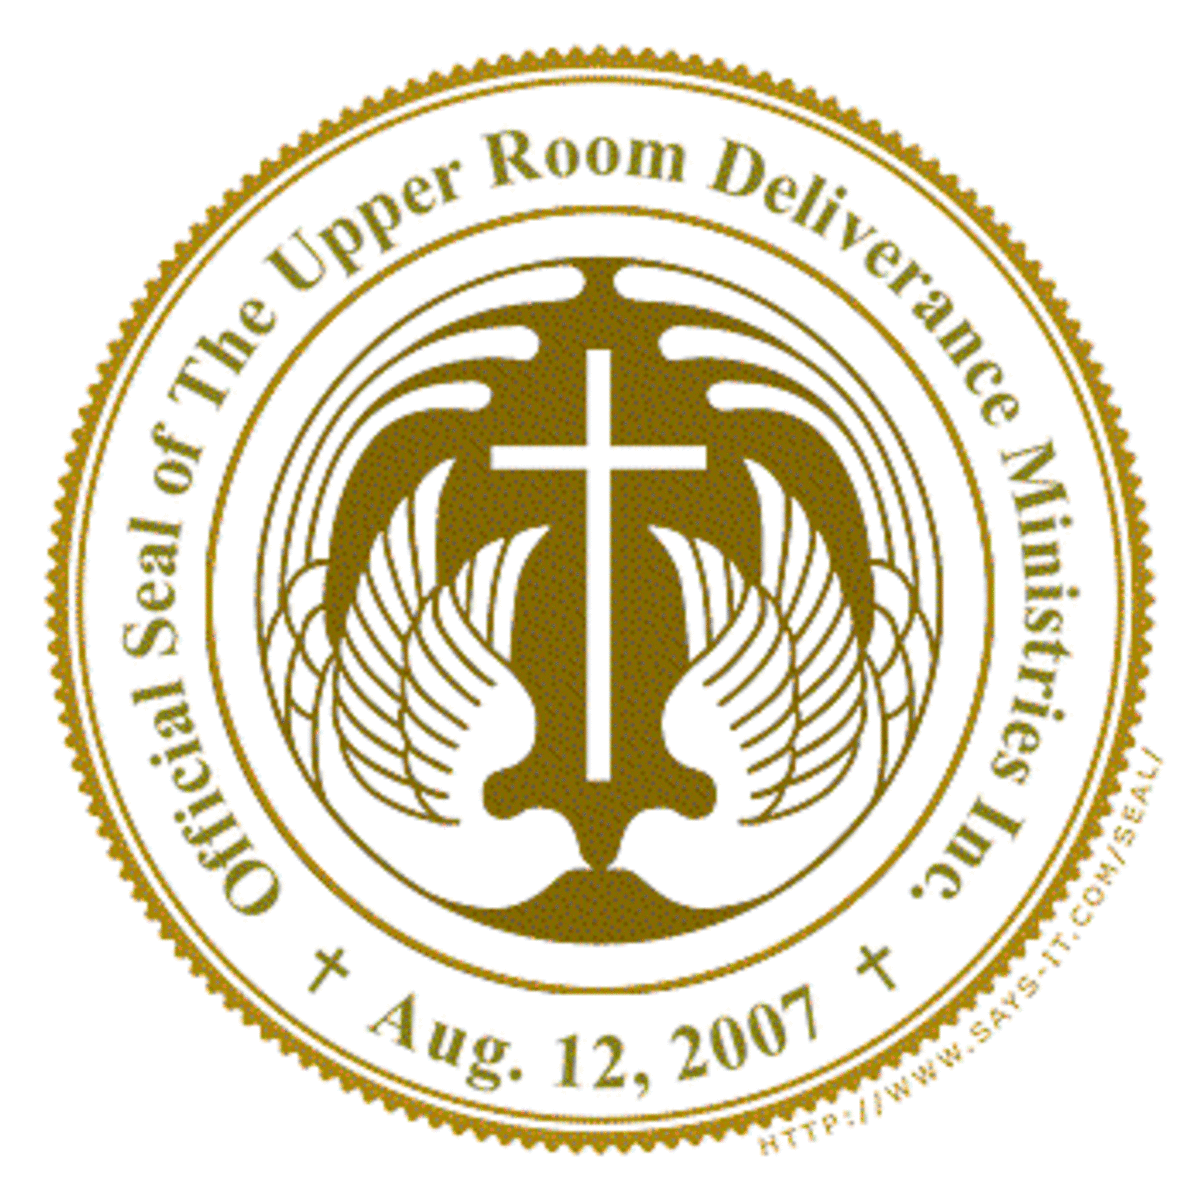 The Official Seal of The Upper Room Deliverance Ministries Inc.